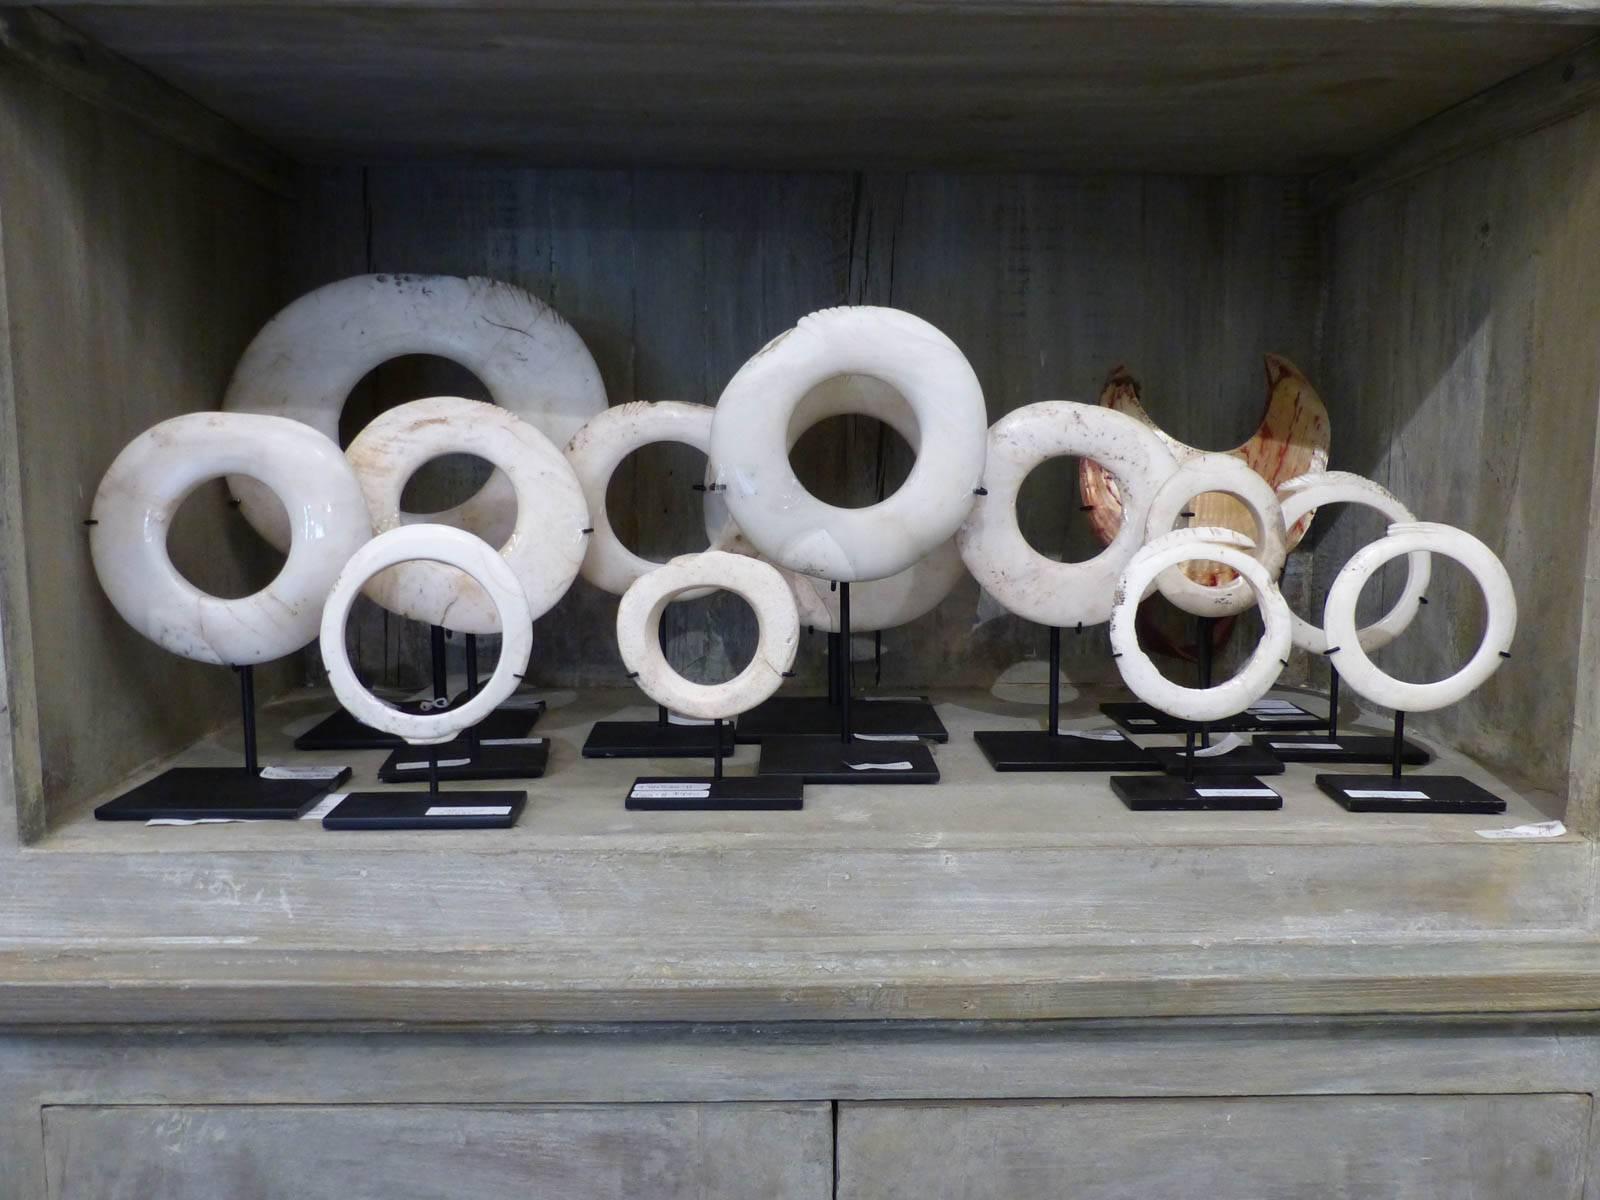 An assortment of Yua Wenga shell currencies from Papua New Guinea. Yua (Money) Wenga (Clam Rings) are clamshell rings cut with bamboo from giant clamshells. These rings are still being cut and used in ceremonies and exchanges. Yangoru, Sasauia,